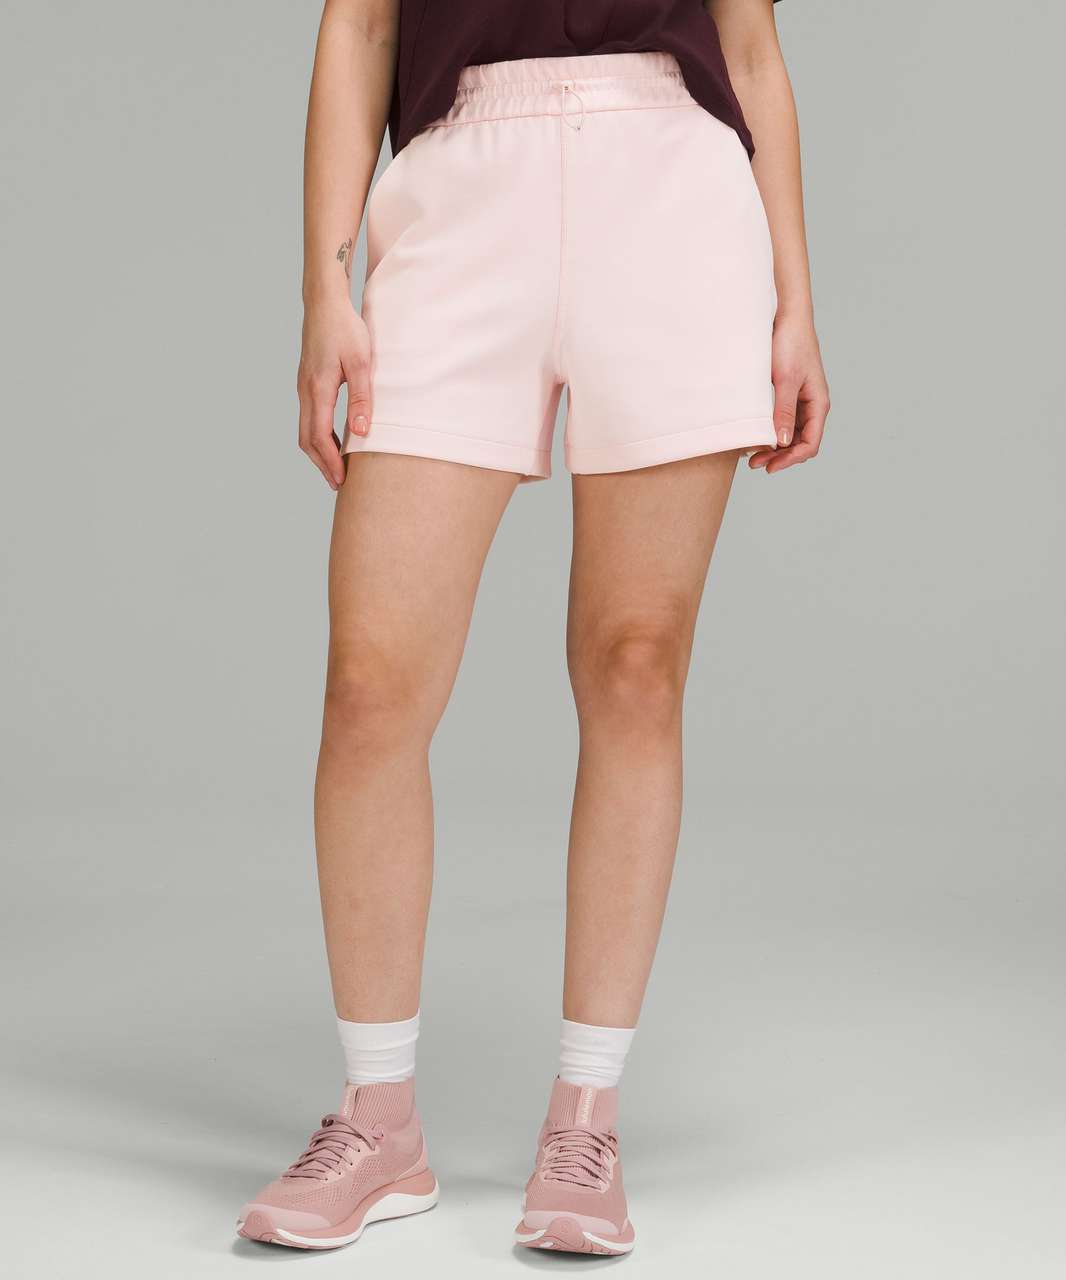 Lululemon Softstreme High-Rise Shorts Pink Size 4 - $50 - From Hayley